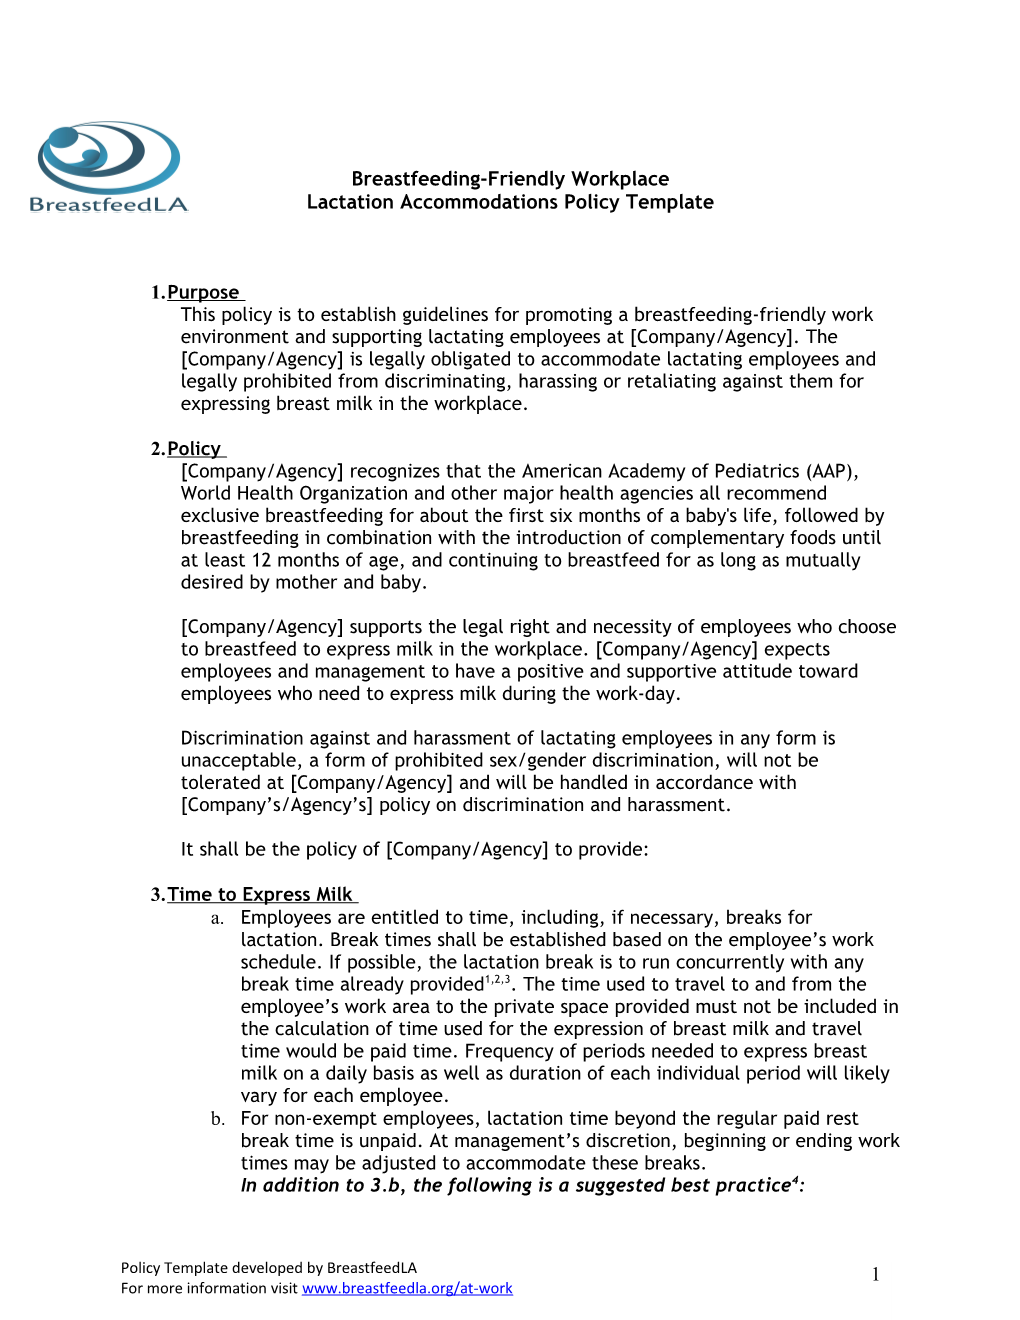 Lactation Accommodations Policy Template